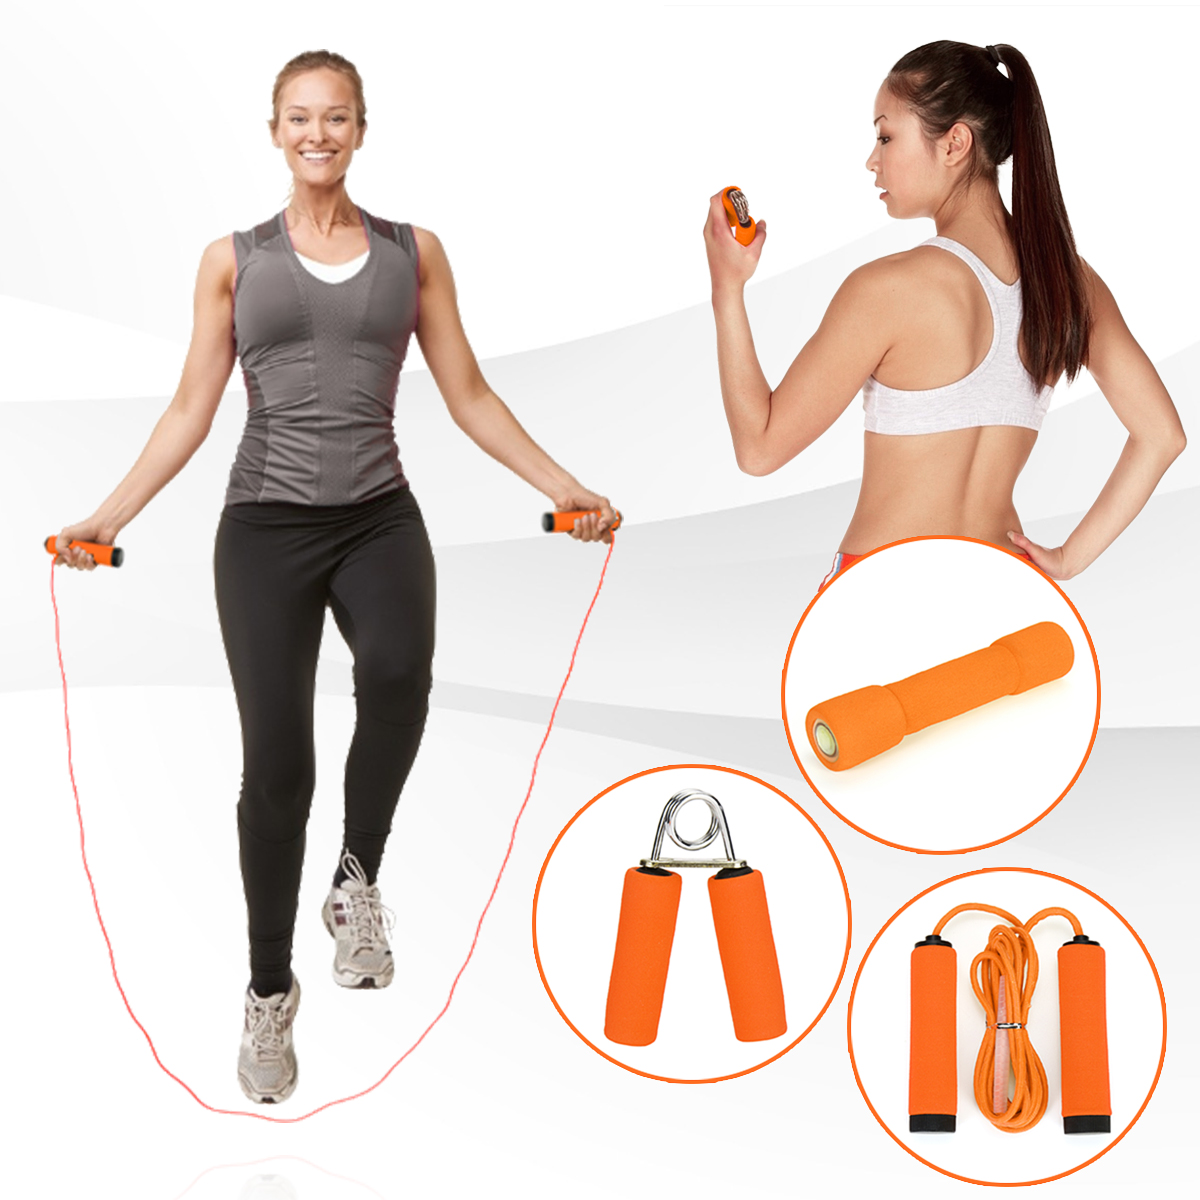 3PcsSet-Skipping-Rope-Fitness-Heavy-Hand-Gripper-Dumbbells-Muscle-Strength-Training-Tools-1692559-1